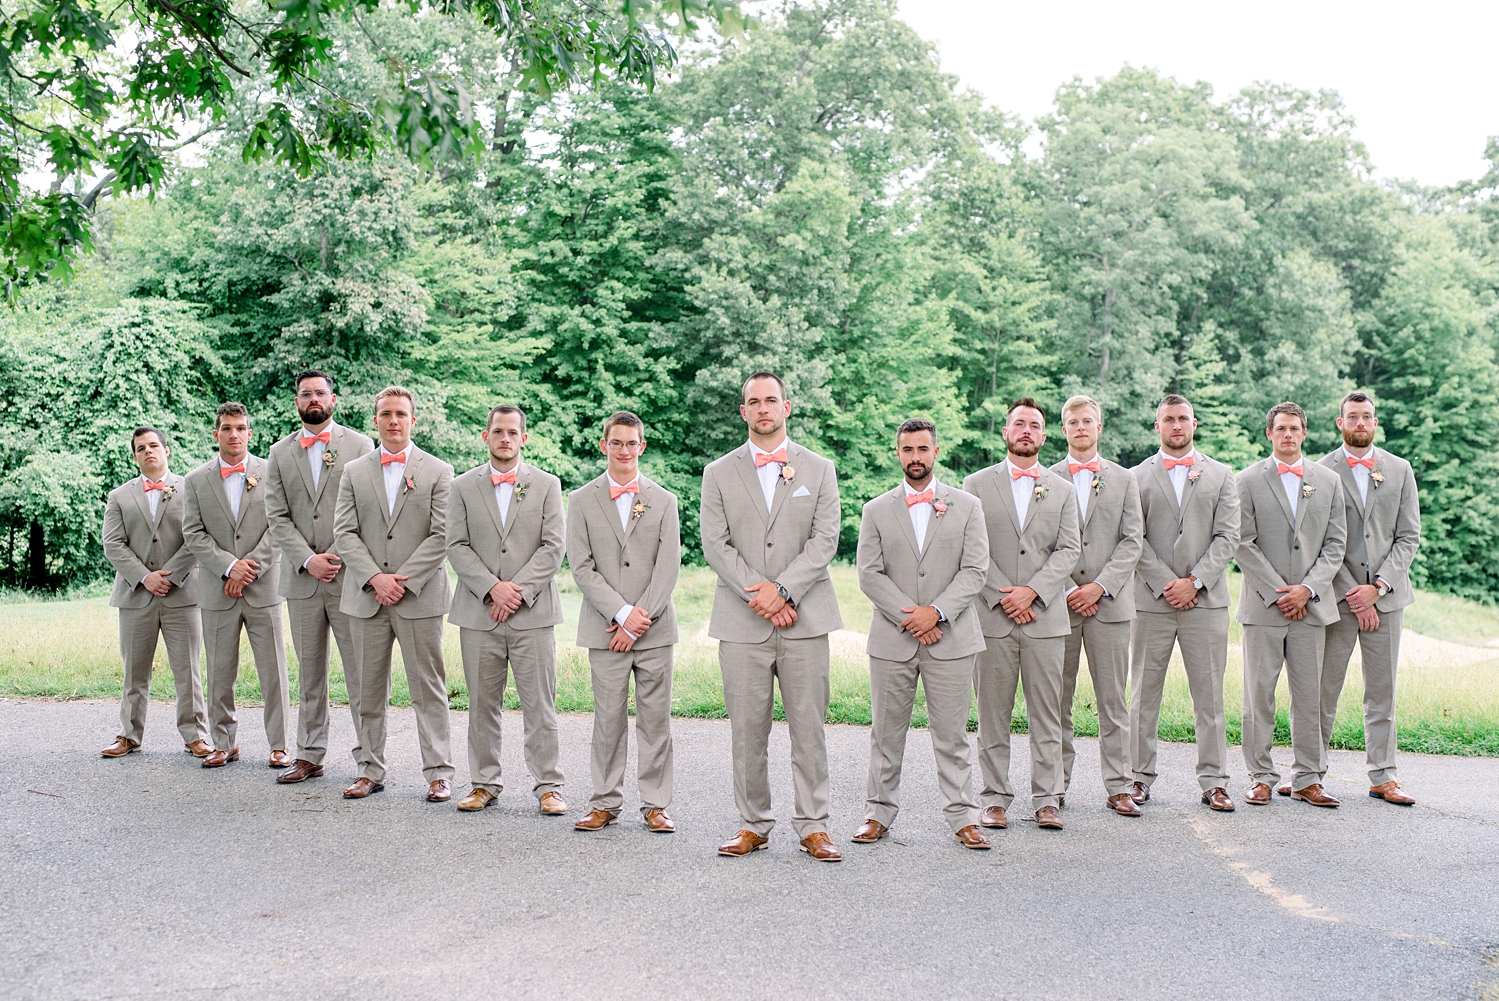 Romantic Garden Themed, Peach and Coral Summertime Wedding by Erika Christine Photography. Large Bridal Party